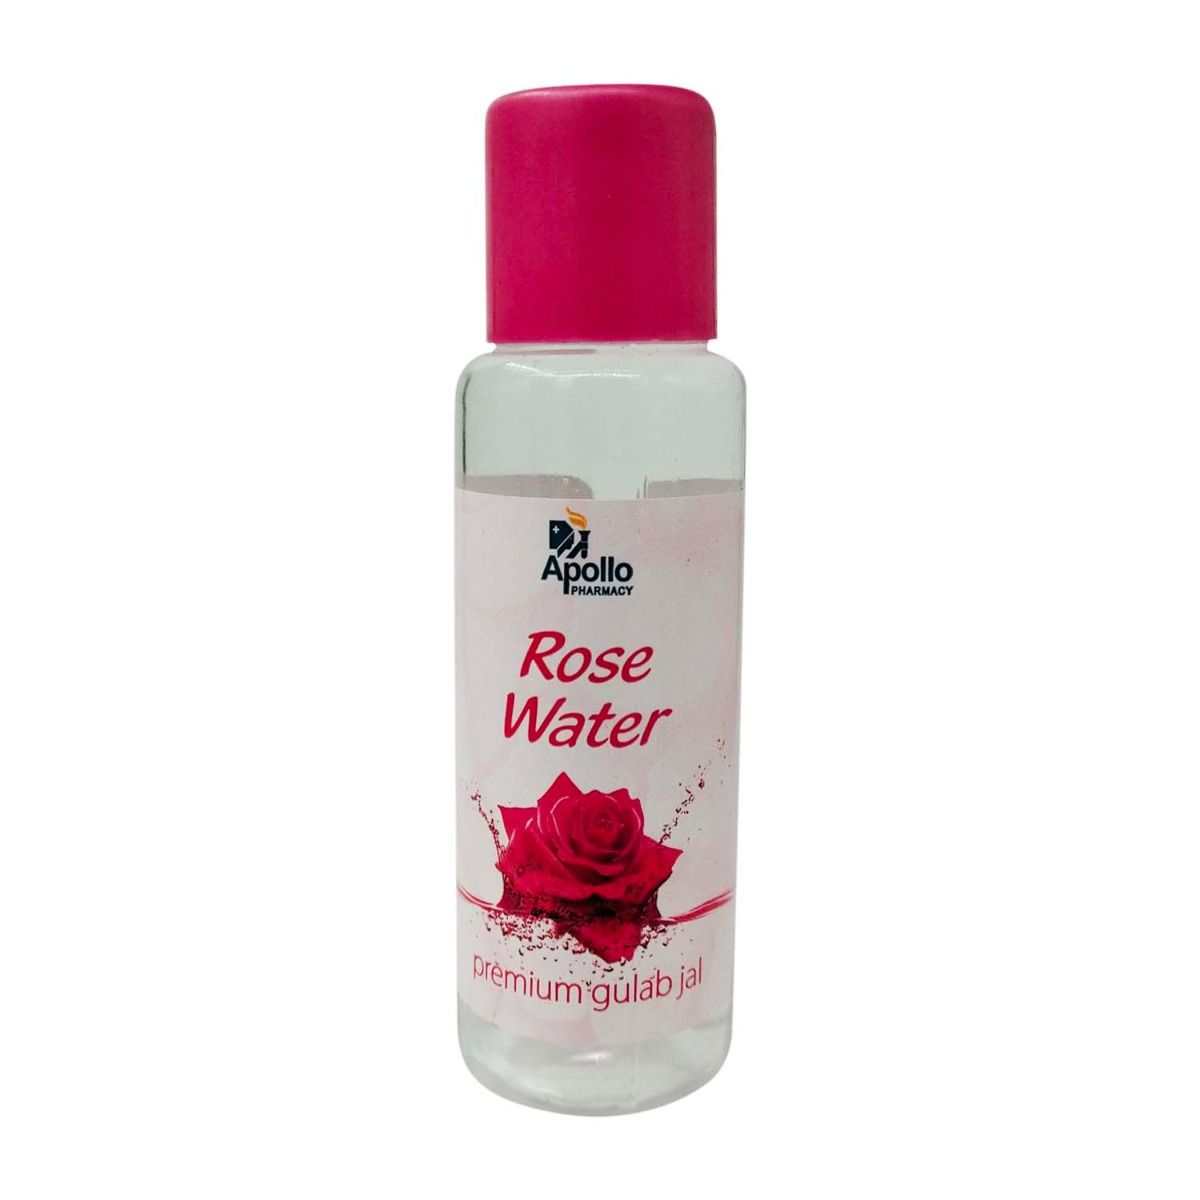 Apollo Pharmacy Rose Water, 100 ml, Pack of 1 